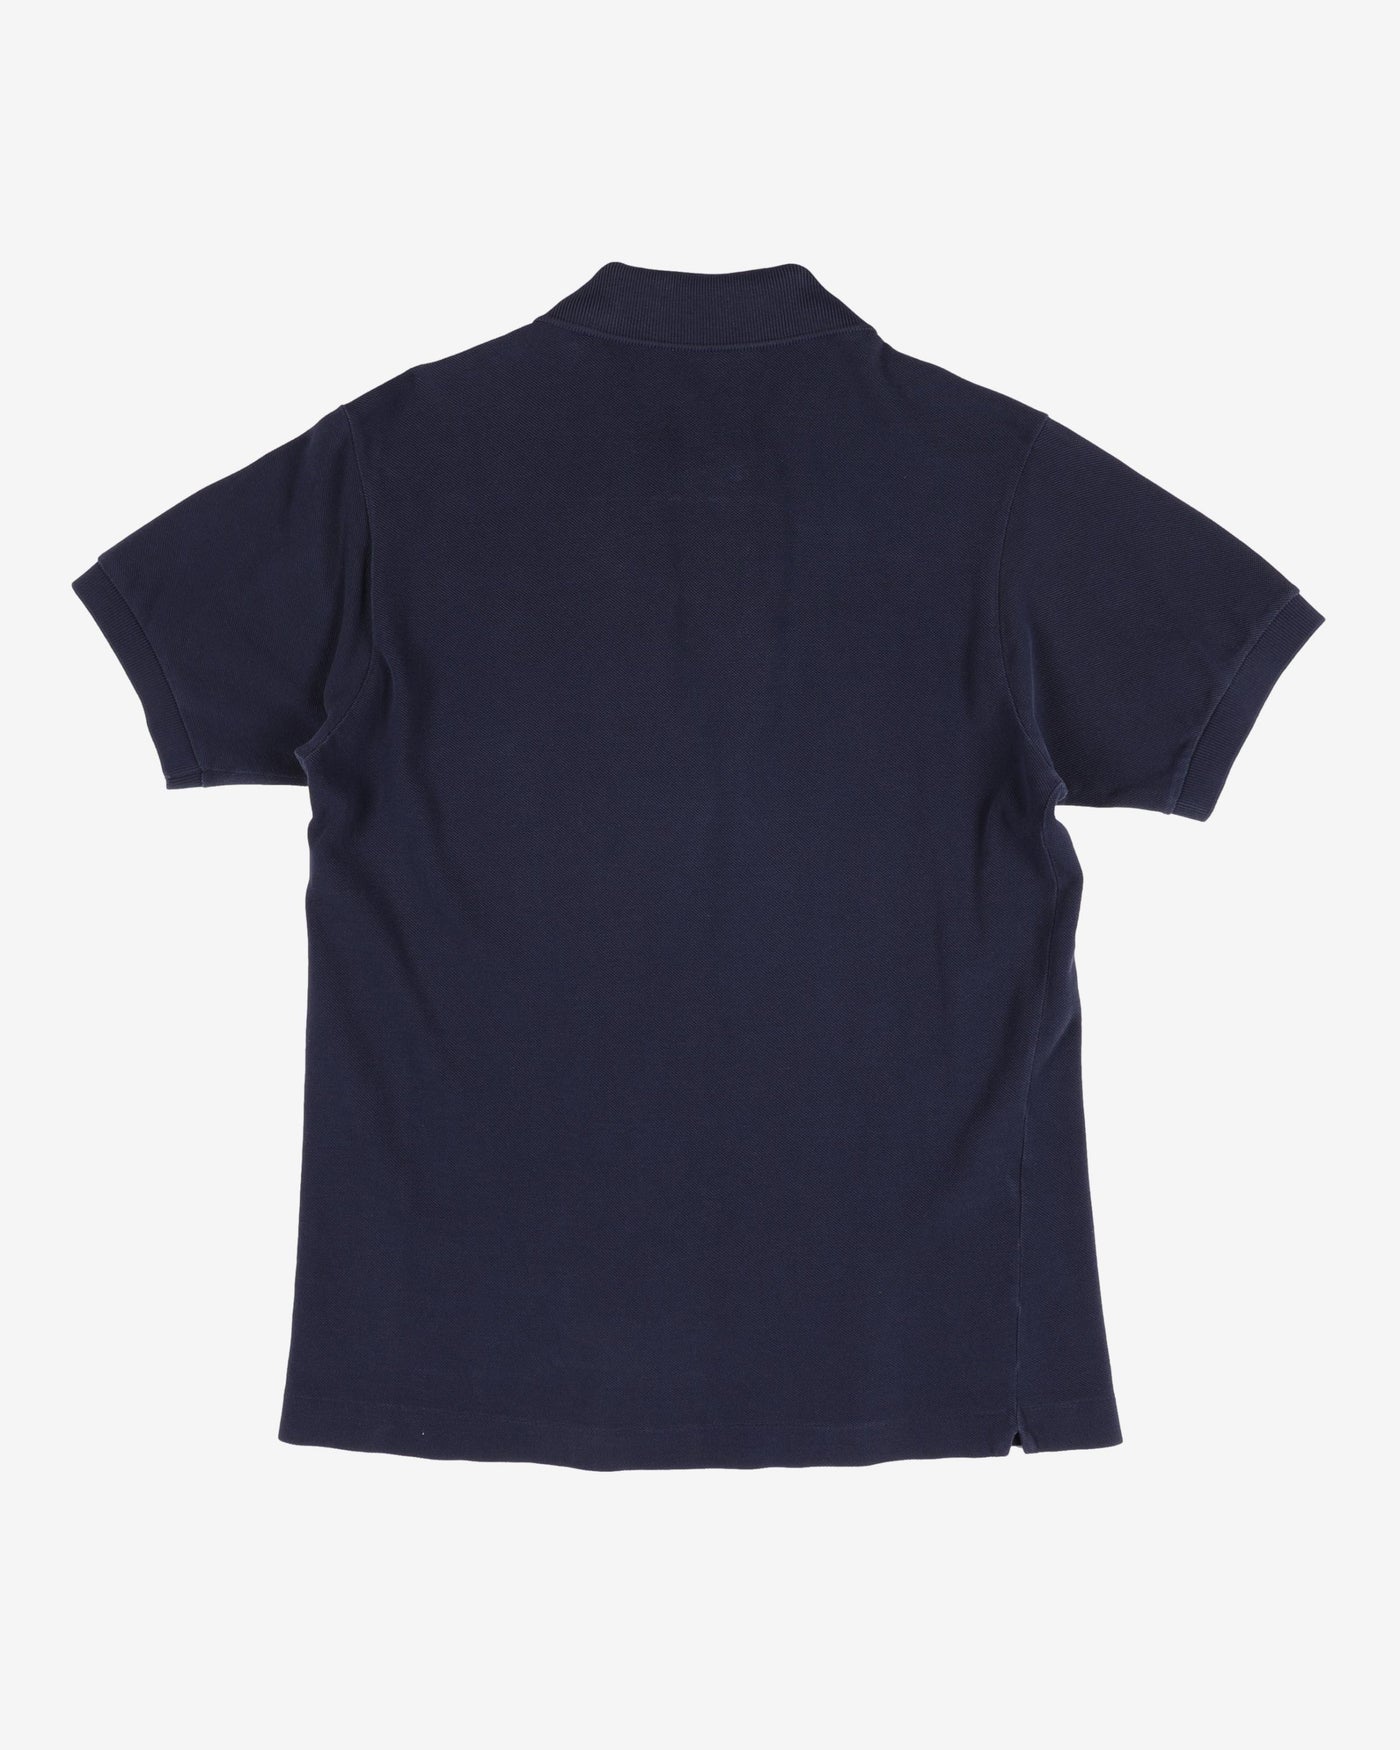 Navy Lacoste Classic Fit Logo Polo Shirt - S